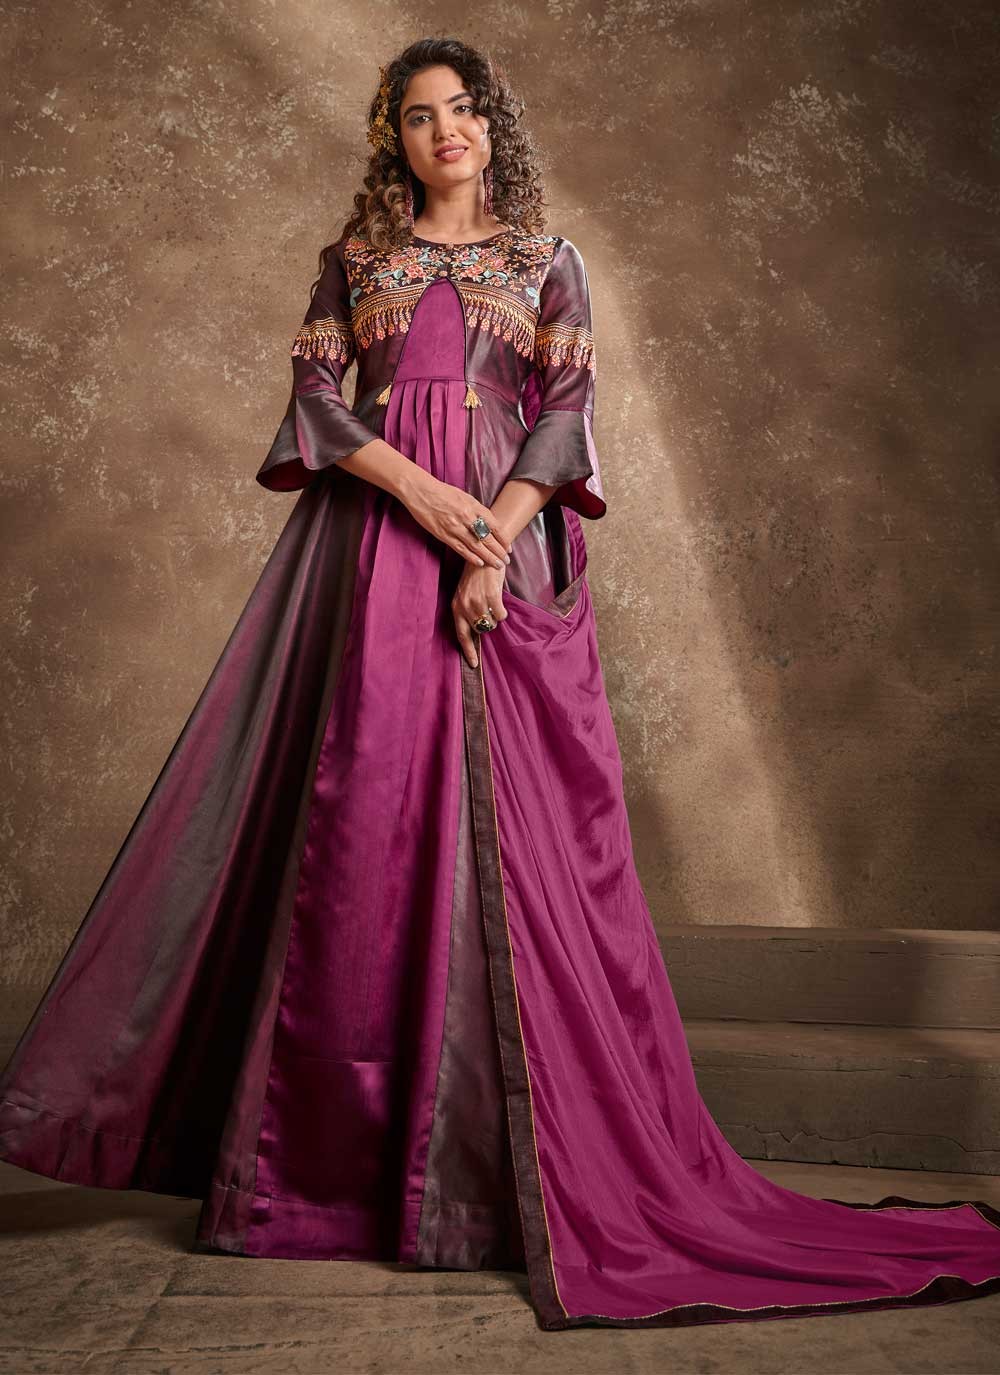 Readymade Anarkali Suit For Ceremonial